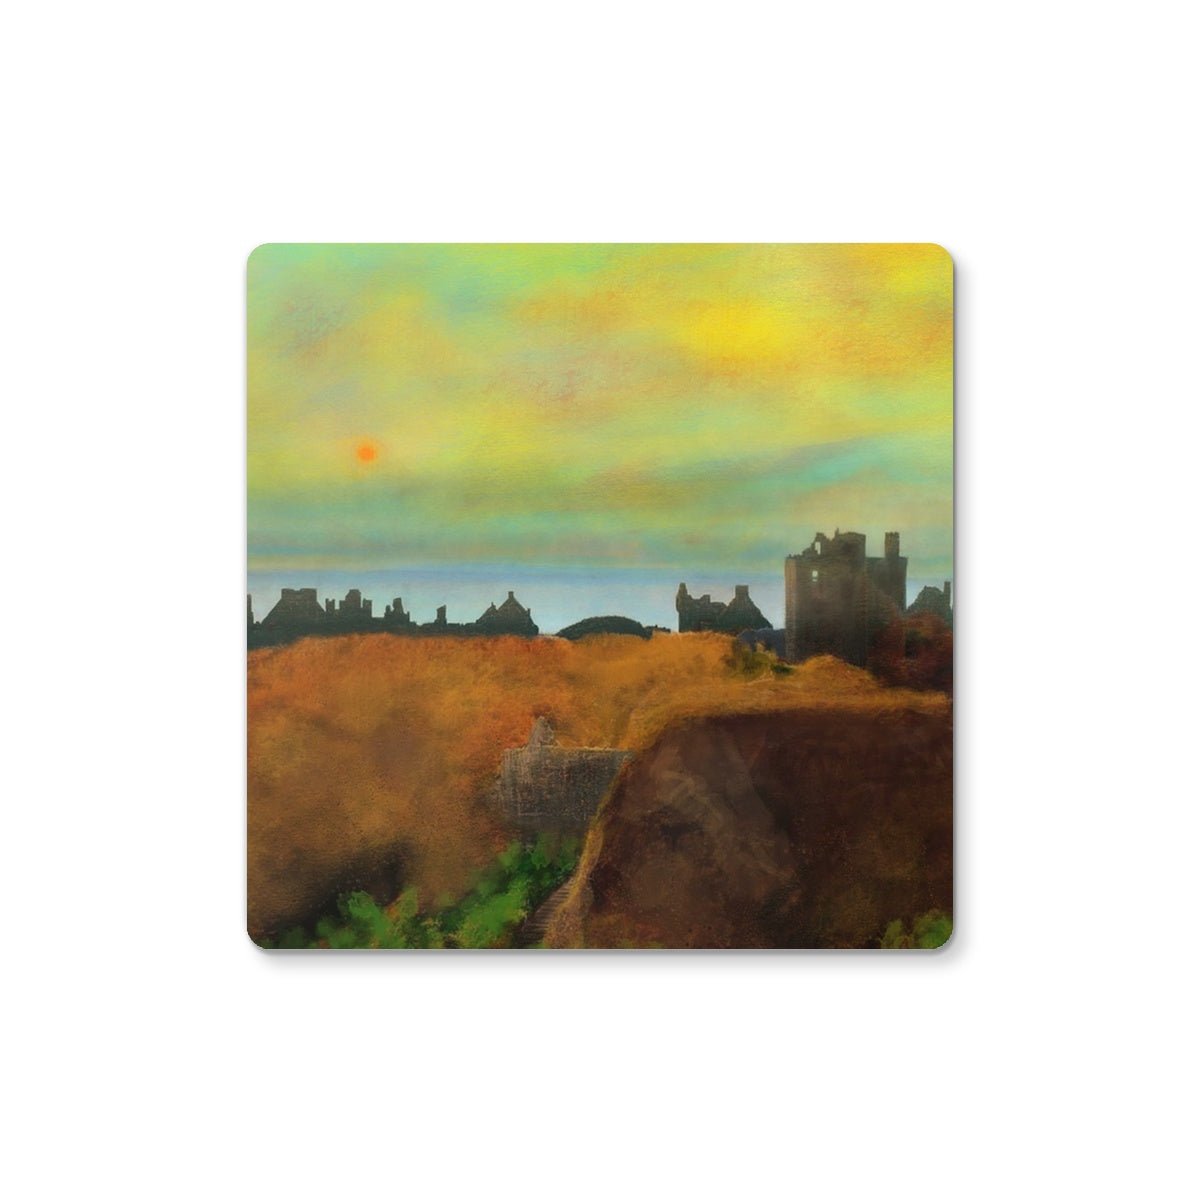 Dunnottar Castle Art Gifts Coaster-Coasters-Scottish Castles Art Gallery-6 Coasters-Paintings, Prints, Homeware, Art Gifts From Scotland By Scottish Artist Kevin Hunter